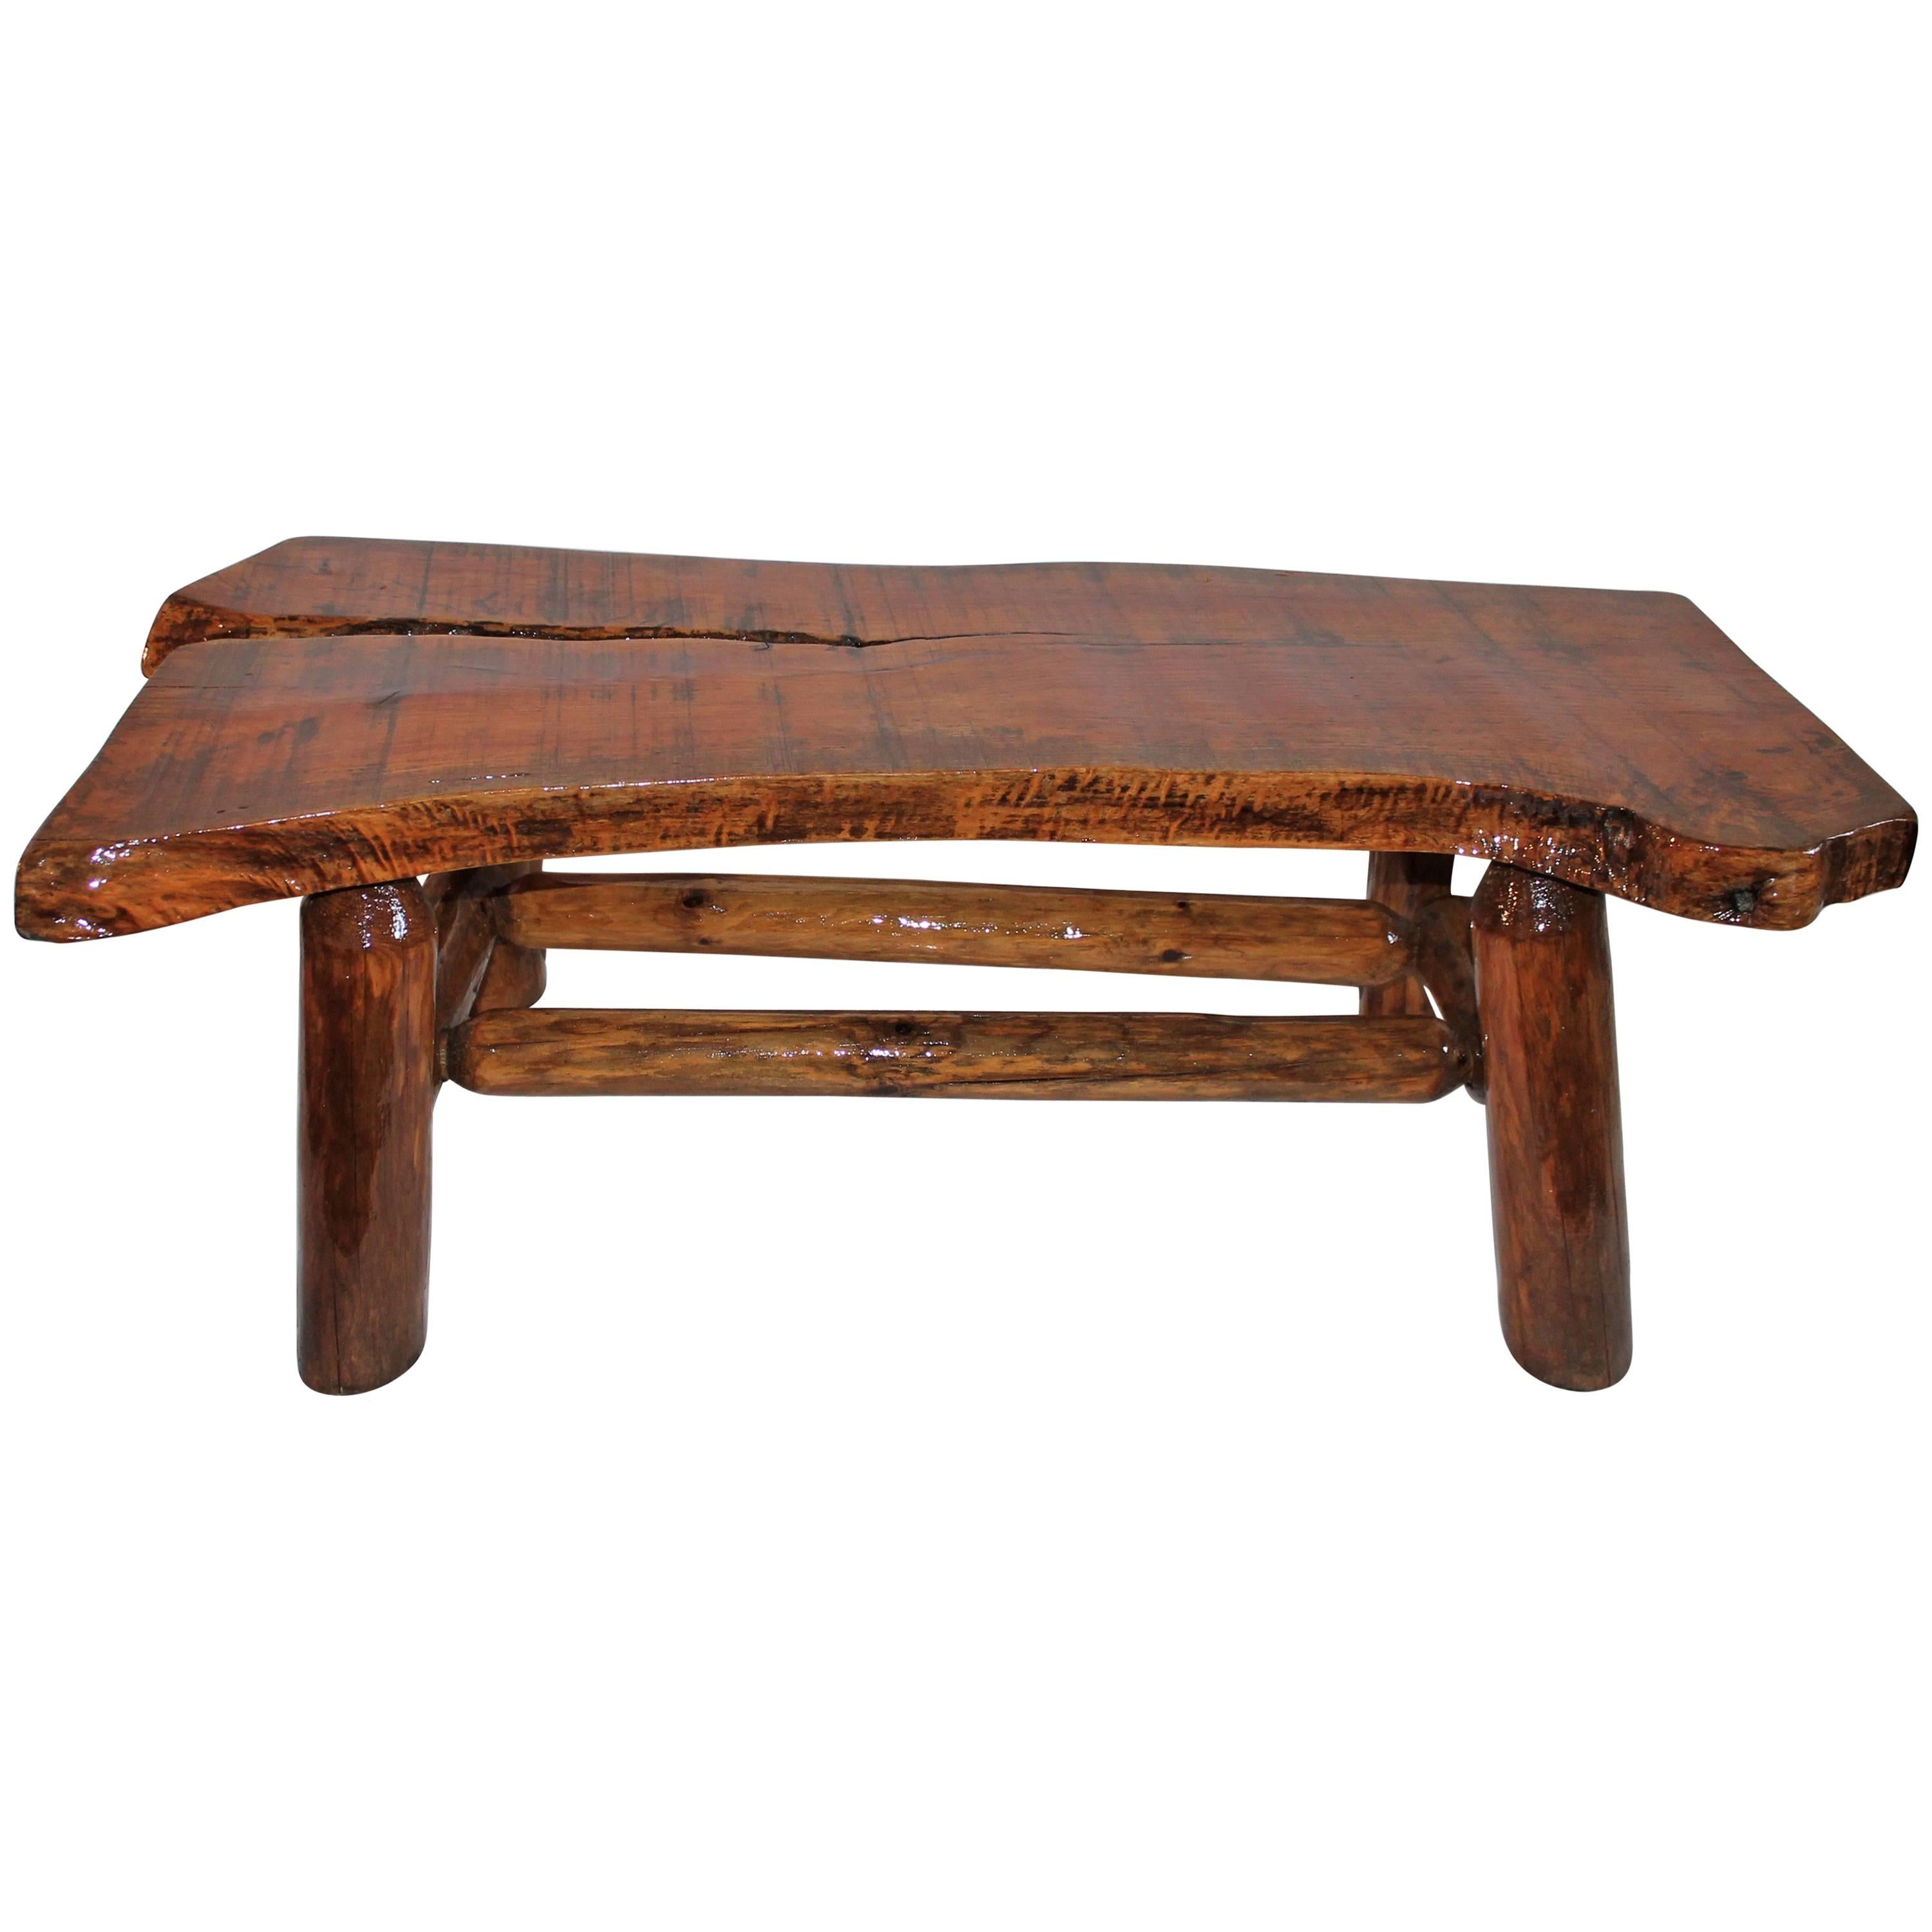 Rustic Coffee Table or Bench from Midwest For Sale